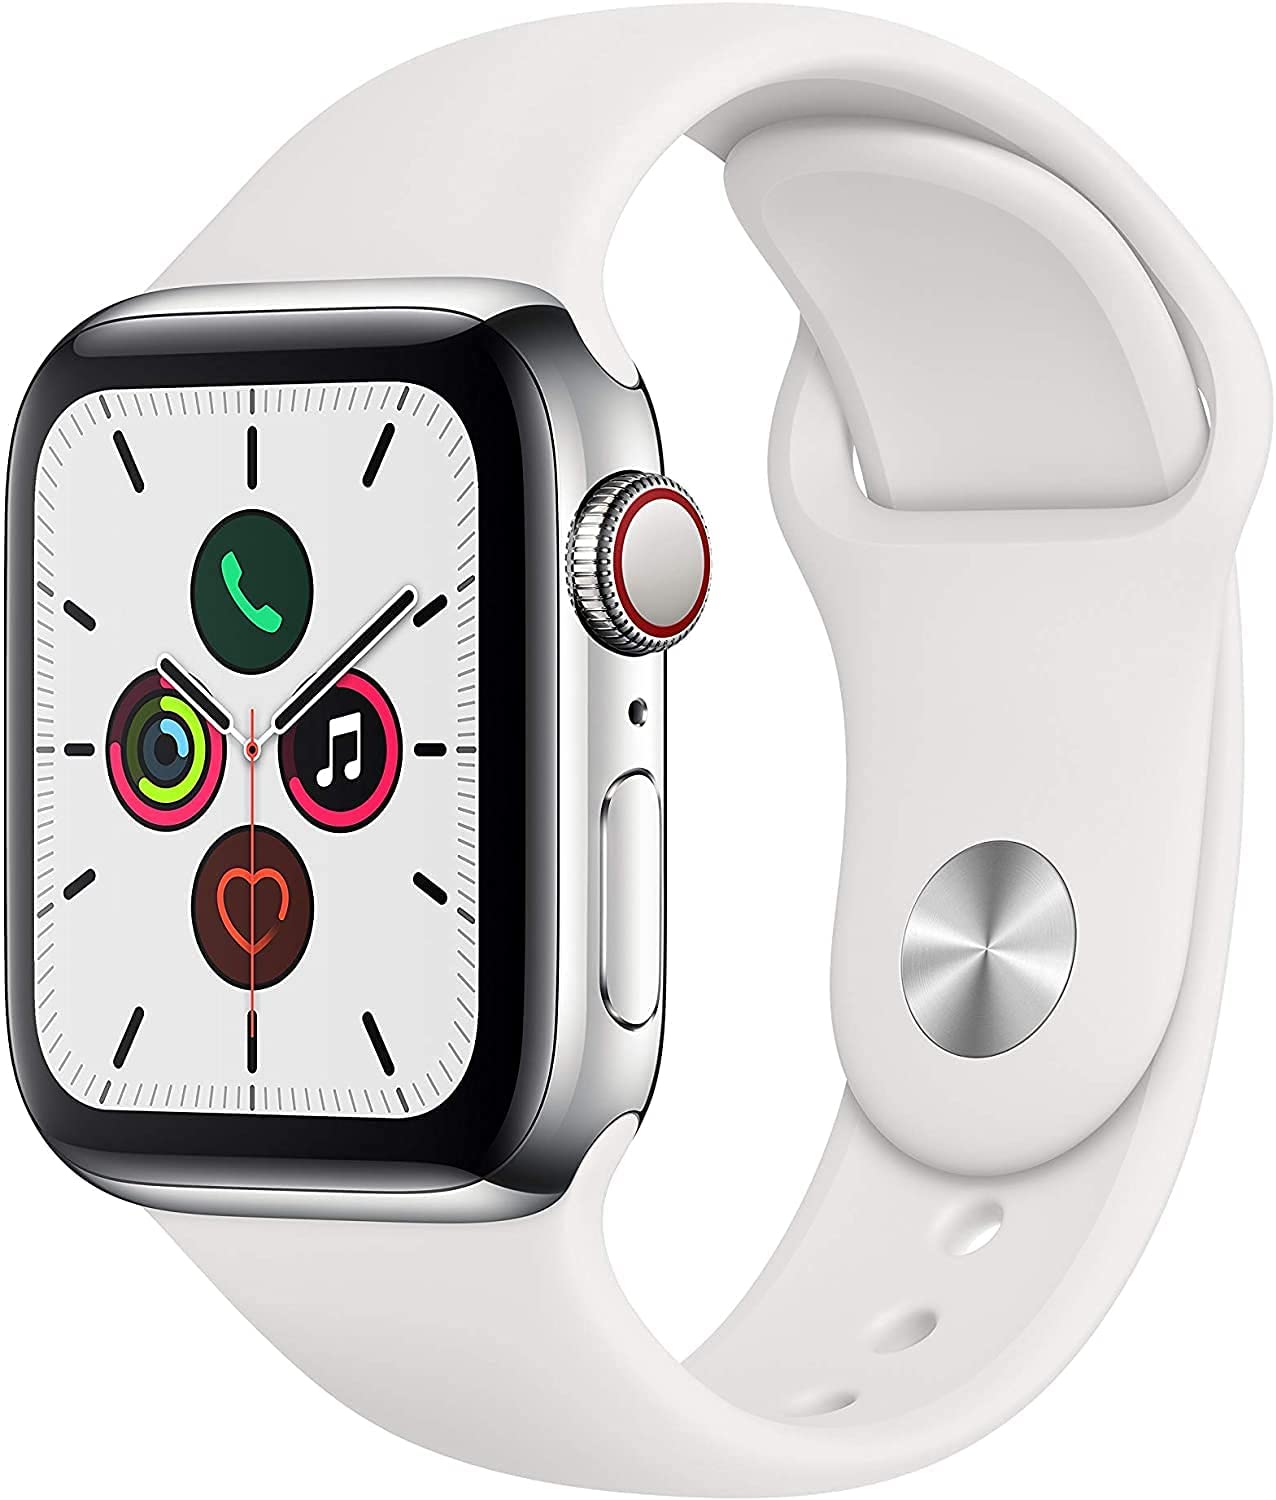 Apple Watch Series 5 (2019) 44mm GPS + Cellular - Stainless Steel Case &amp; White Sport Band (Refurbished)